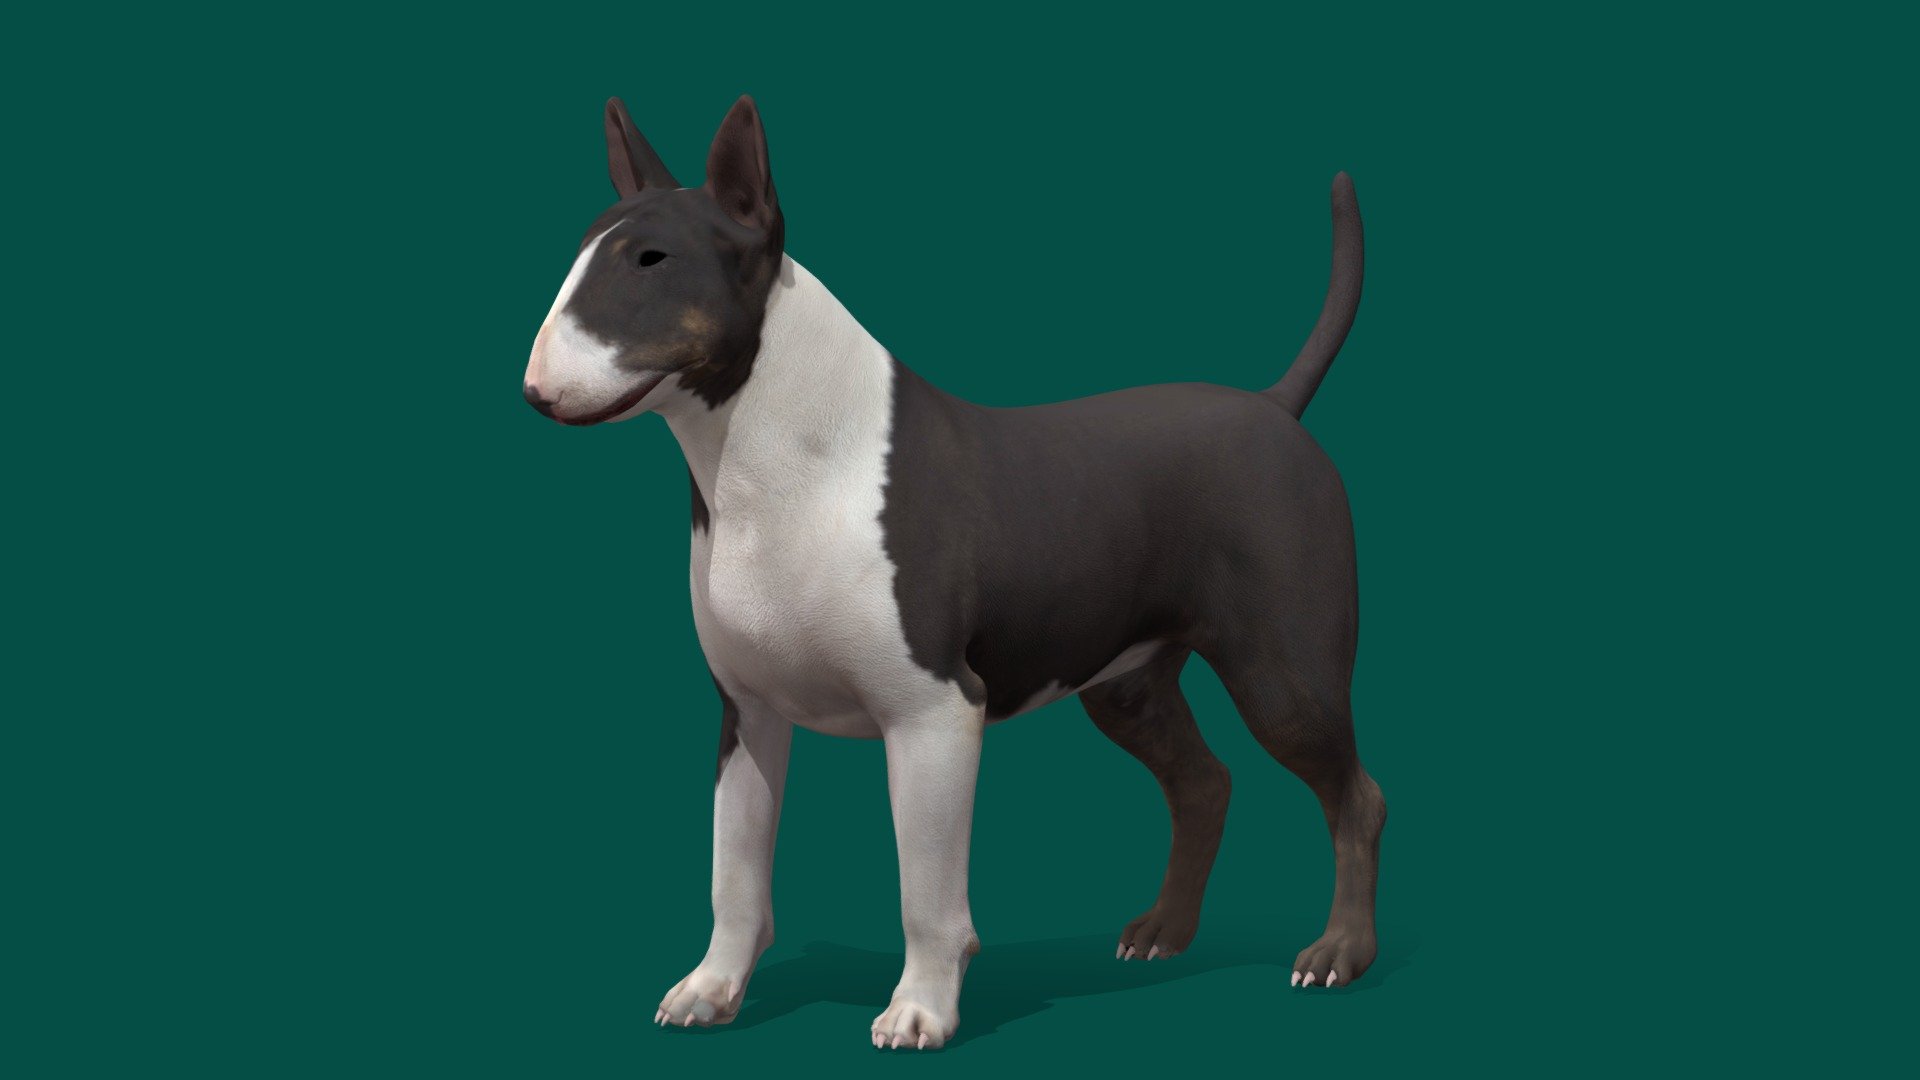 **Bull Terrier Dog with Game Ready 8 Animations ,4K PBR Textures Material. **

The Bull_Terrier is a breed of dog in the terrier family. There is also a miniature version of this breed which is officially known as the Miniature Bull Terrier. The Bull Terrier is a muscular dog breed known for its unique egg-shaped head and triangular eyes. Wikipedia
Temperament: Keen, Stubborn, Sweet-Tempered, Active, Protective, Trainable
Origin: England
Life span: 10 – 14 years
Mass: 22 – 38 kg (Male)
Colors: White, Brindle &amp; White, Tri-color, Fawn &amp; White, Red &amp; White, White &amp; Black Brindle
The Kennel Club: standard - Bull Terrier (Game Ready) - 3D model by Nyilonelycompany 3d model